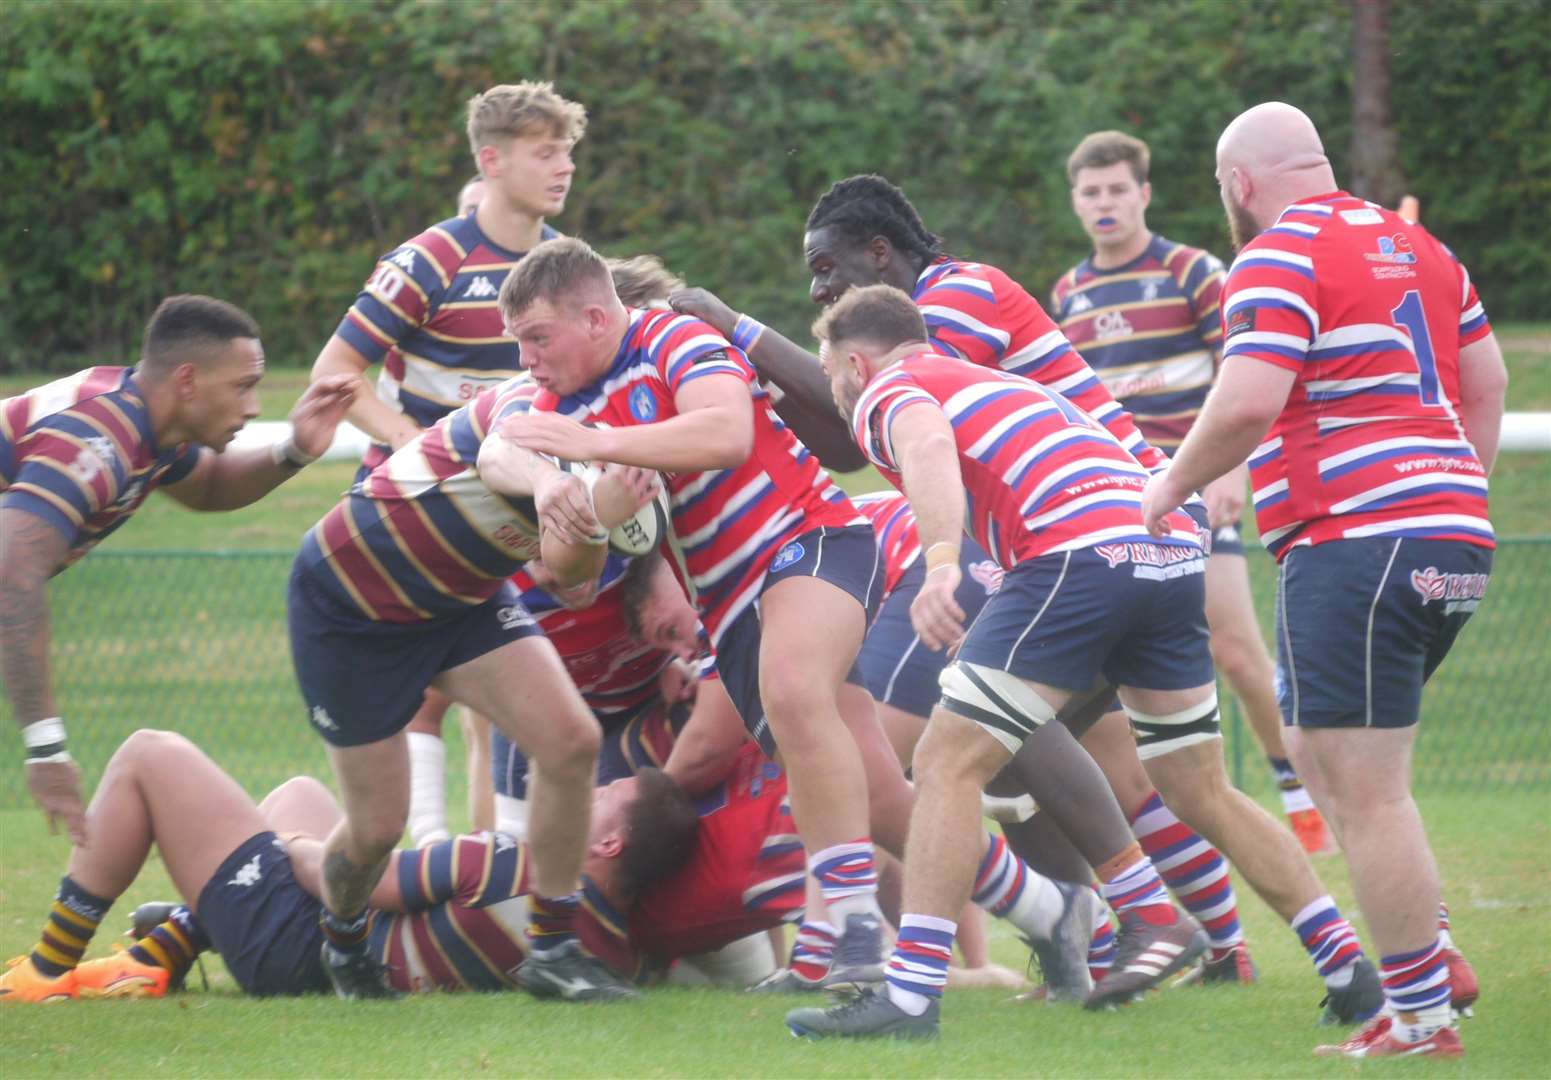 Tonbridge Juddians' Will Holling scored two tries in the win against Old Albanians. Picture: Adam Hookway